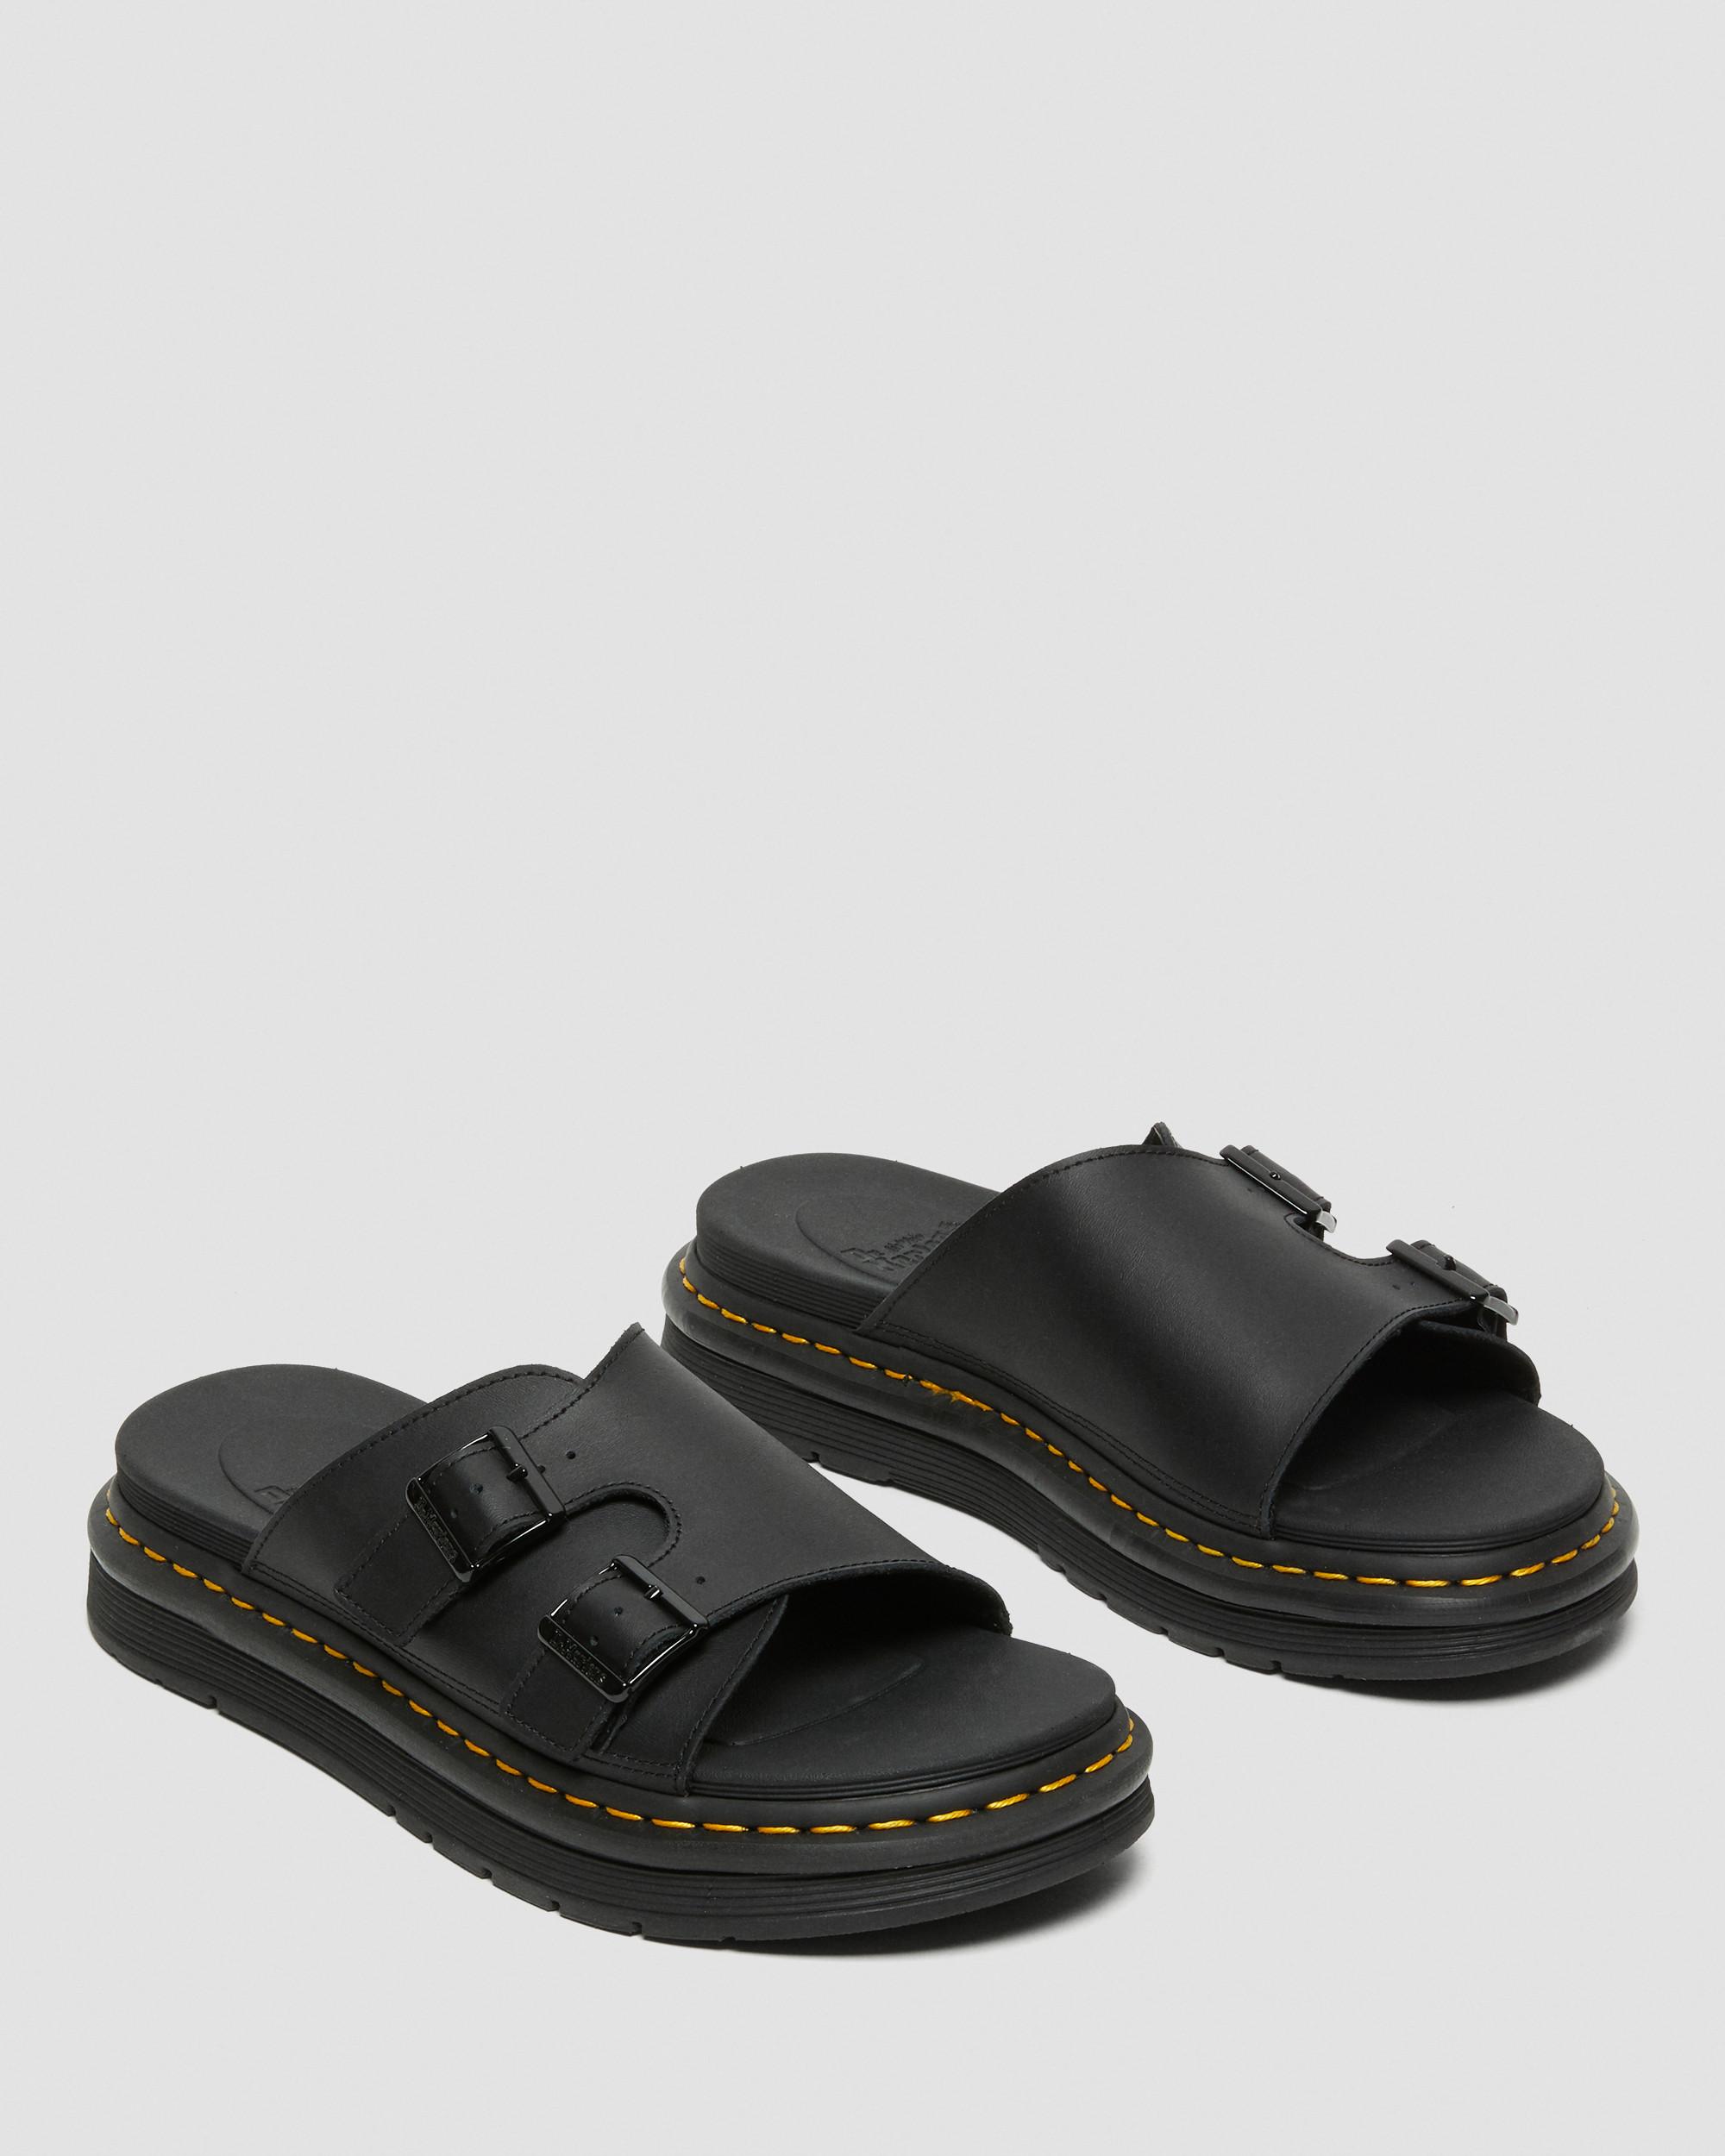 DAX SLIP ON LEATHER SANDALS in Black